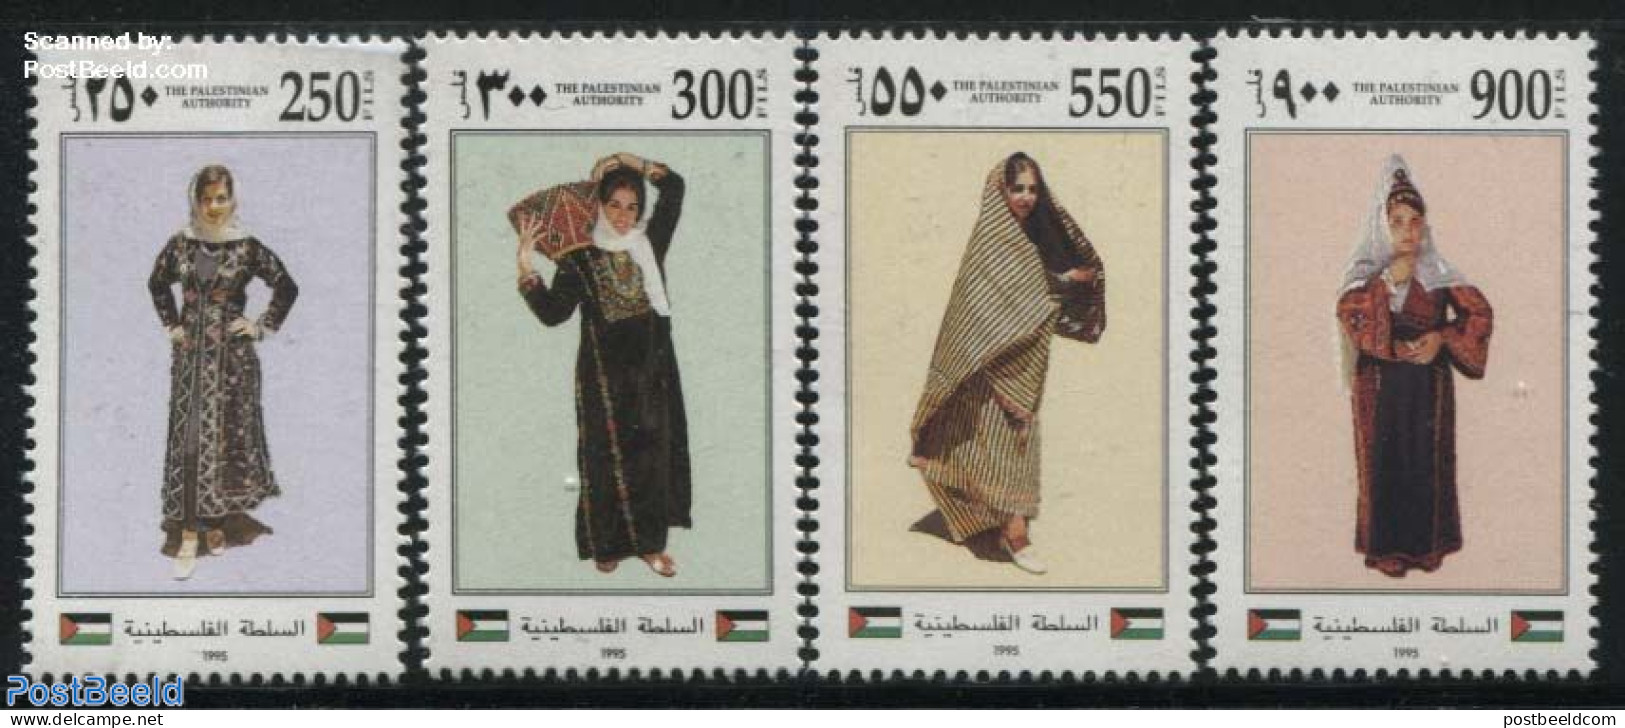 Palestinian Terr. 1995 Costumes 4v, Mint NH, Various - Costumes - Disfraces